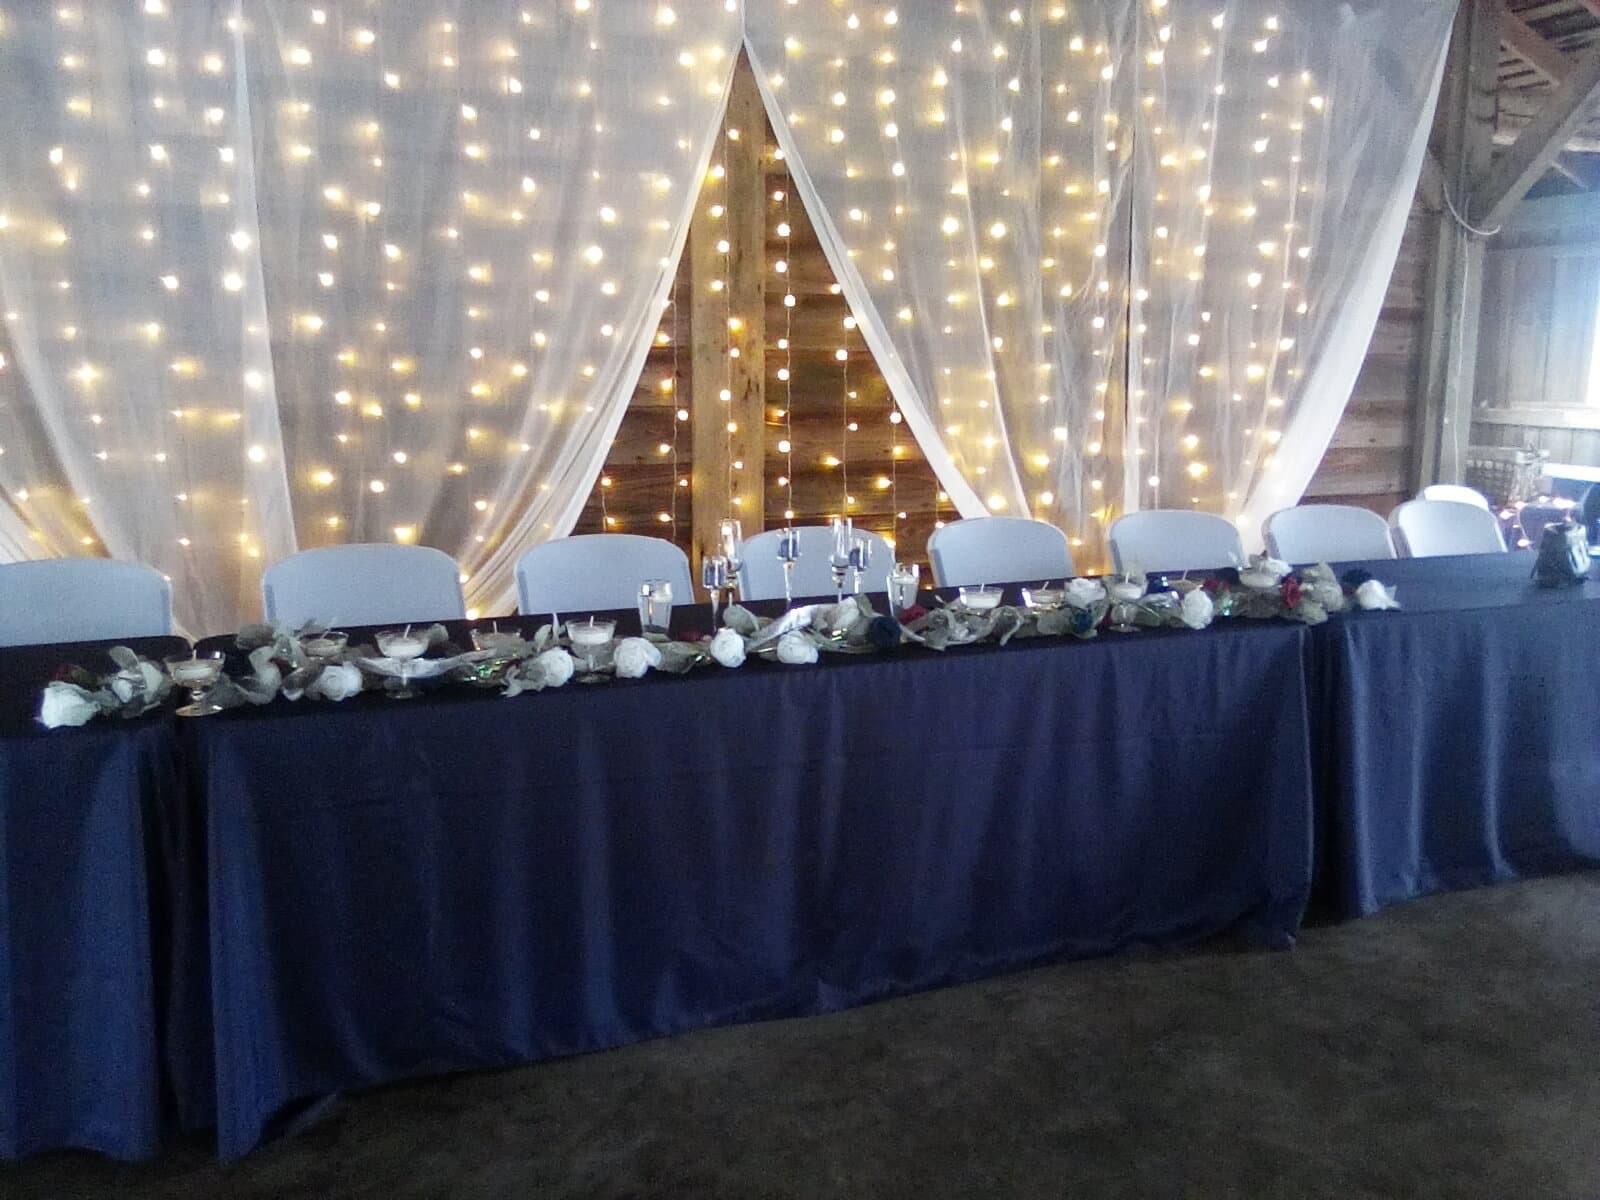 Table cloths & Chair covers